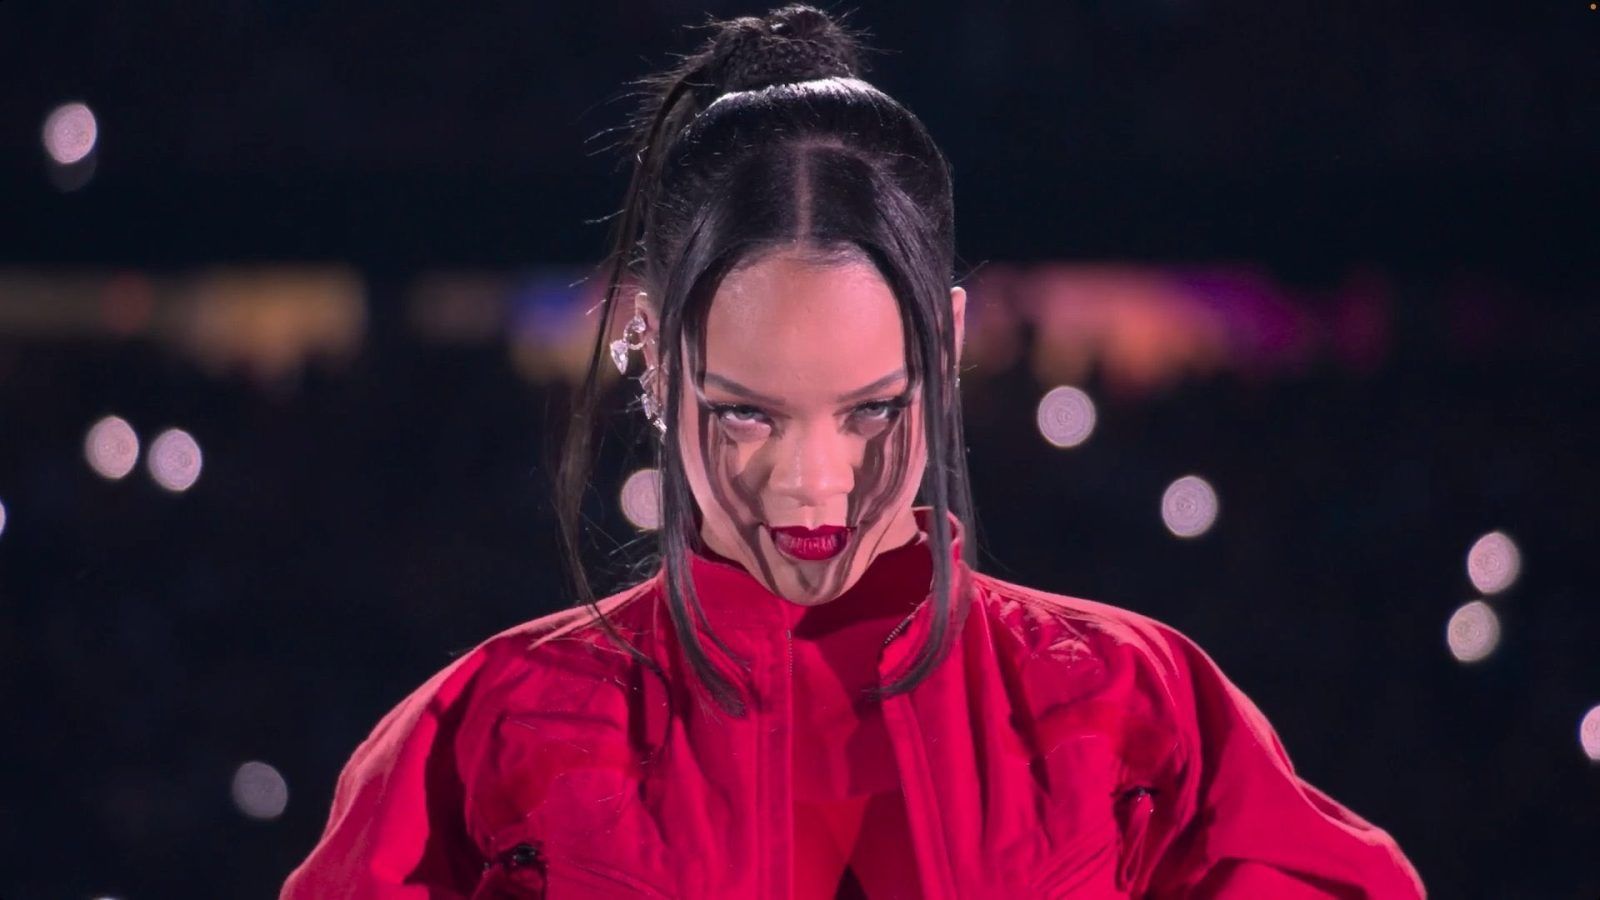 Rihanna performs medley of her songs at Super Bowl 2023 halftime show